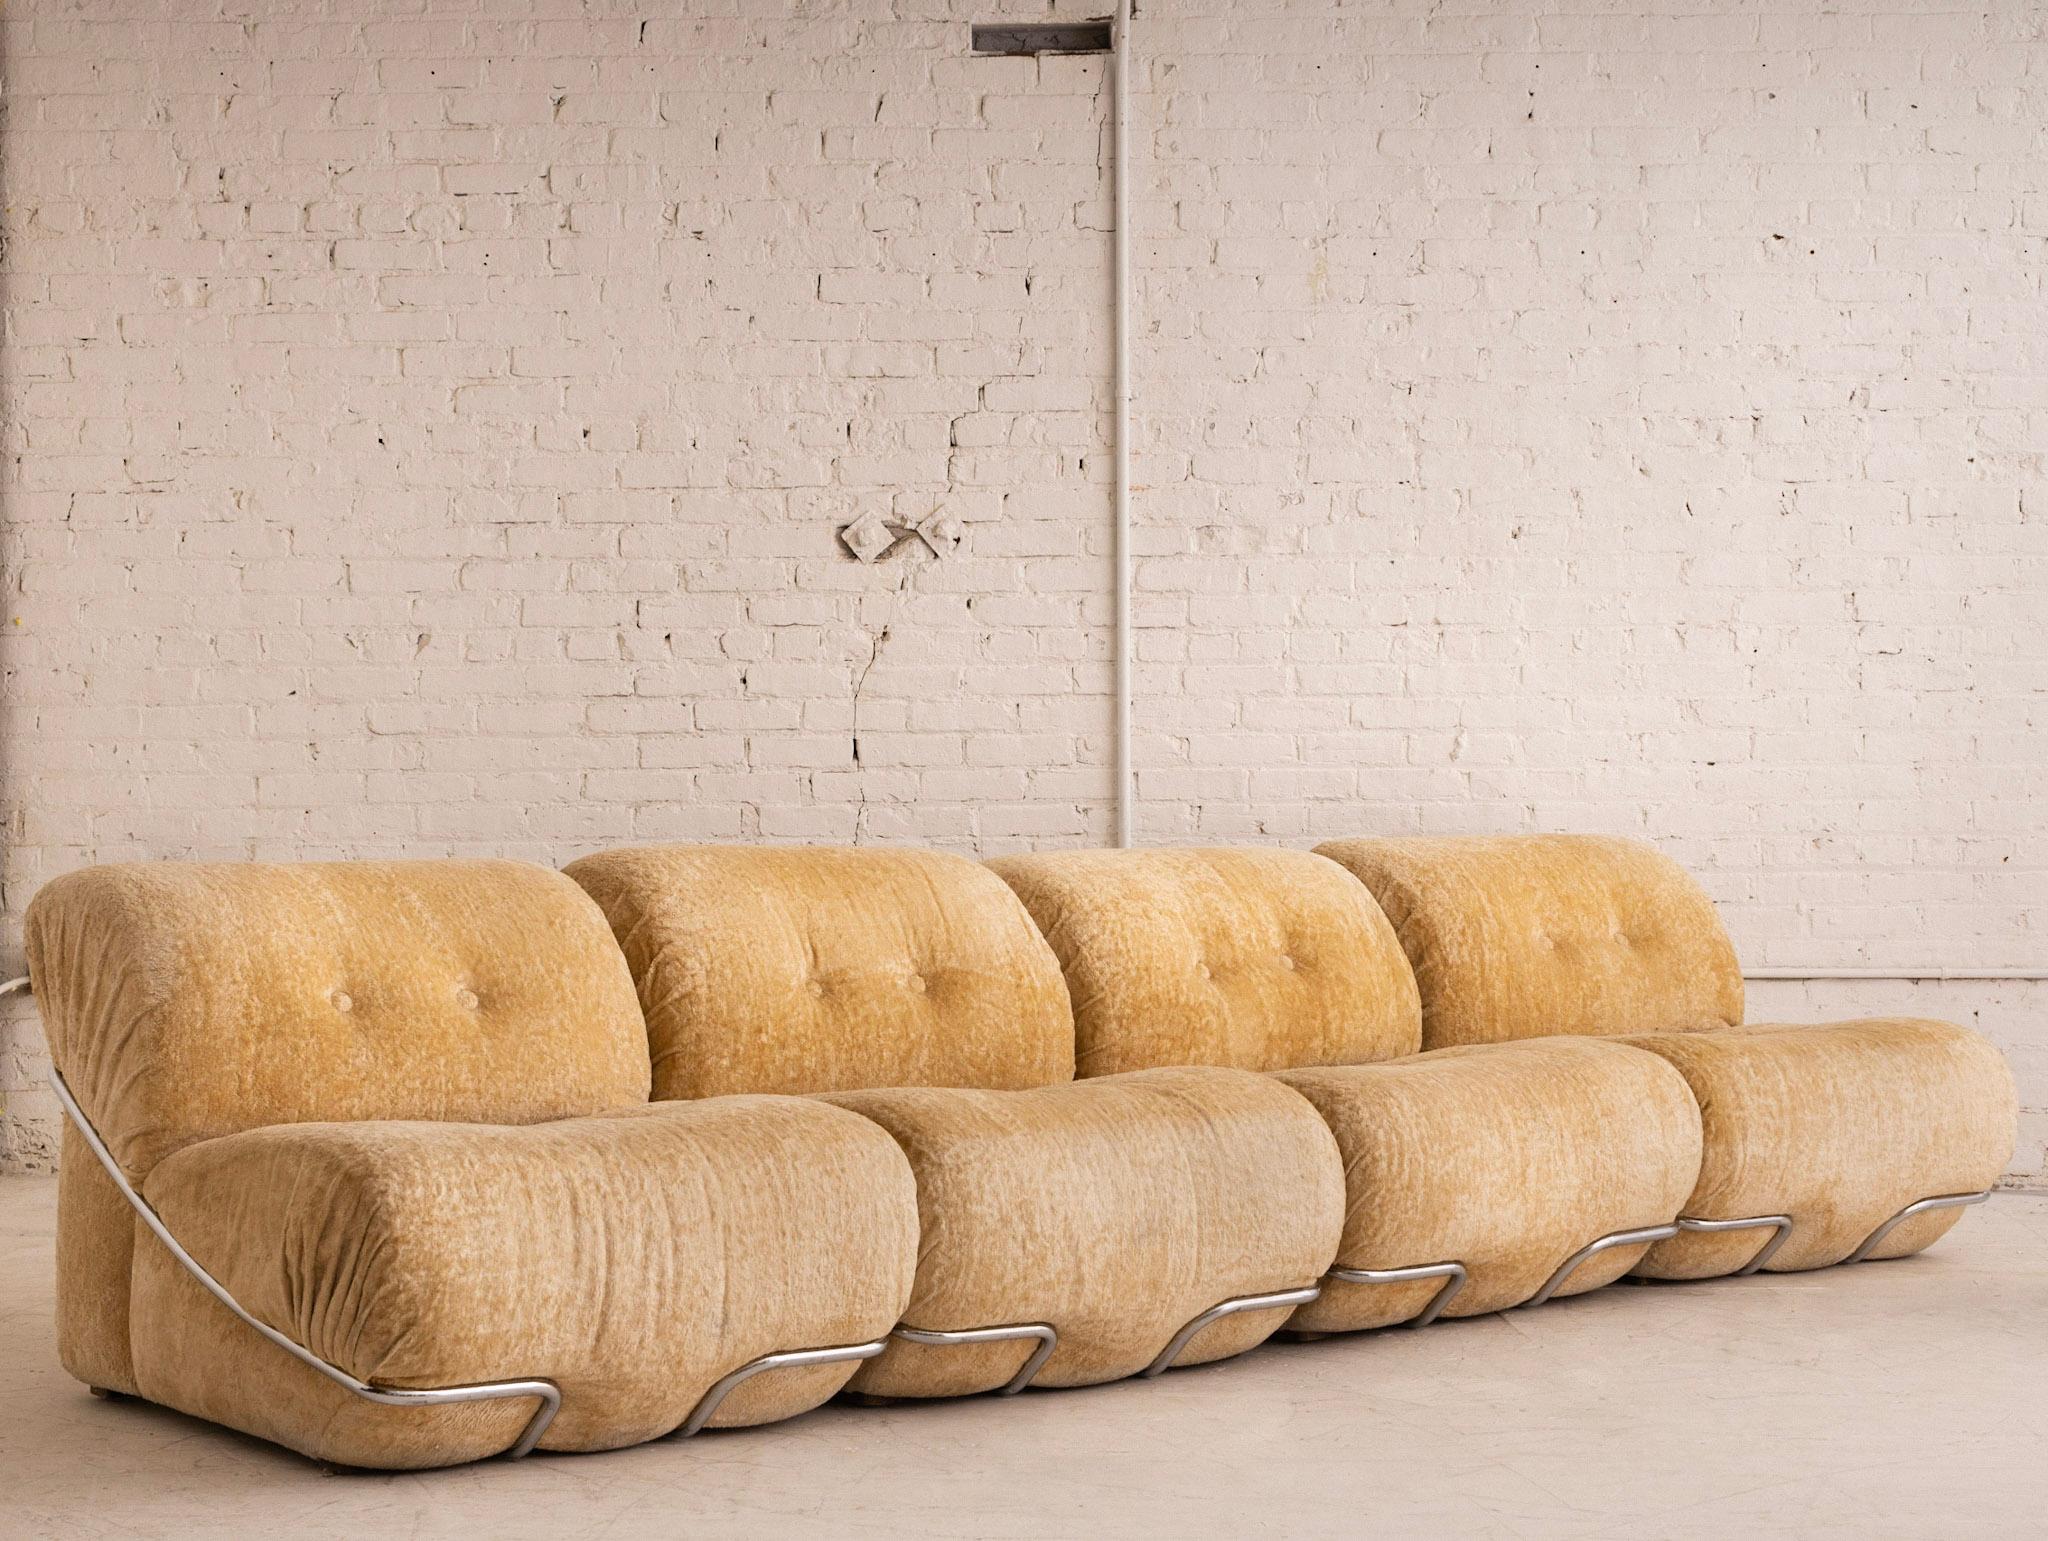 A Space Age modular sectional. 4 pieces can be arranged at your discretion. Tubular chrome wraps around the frame of each piece. Original crushed velvet upholstery. Sourced outside of Florence, Italy.

Individual pieces measure 30” wide, 36” deep,